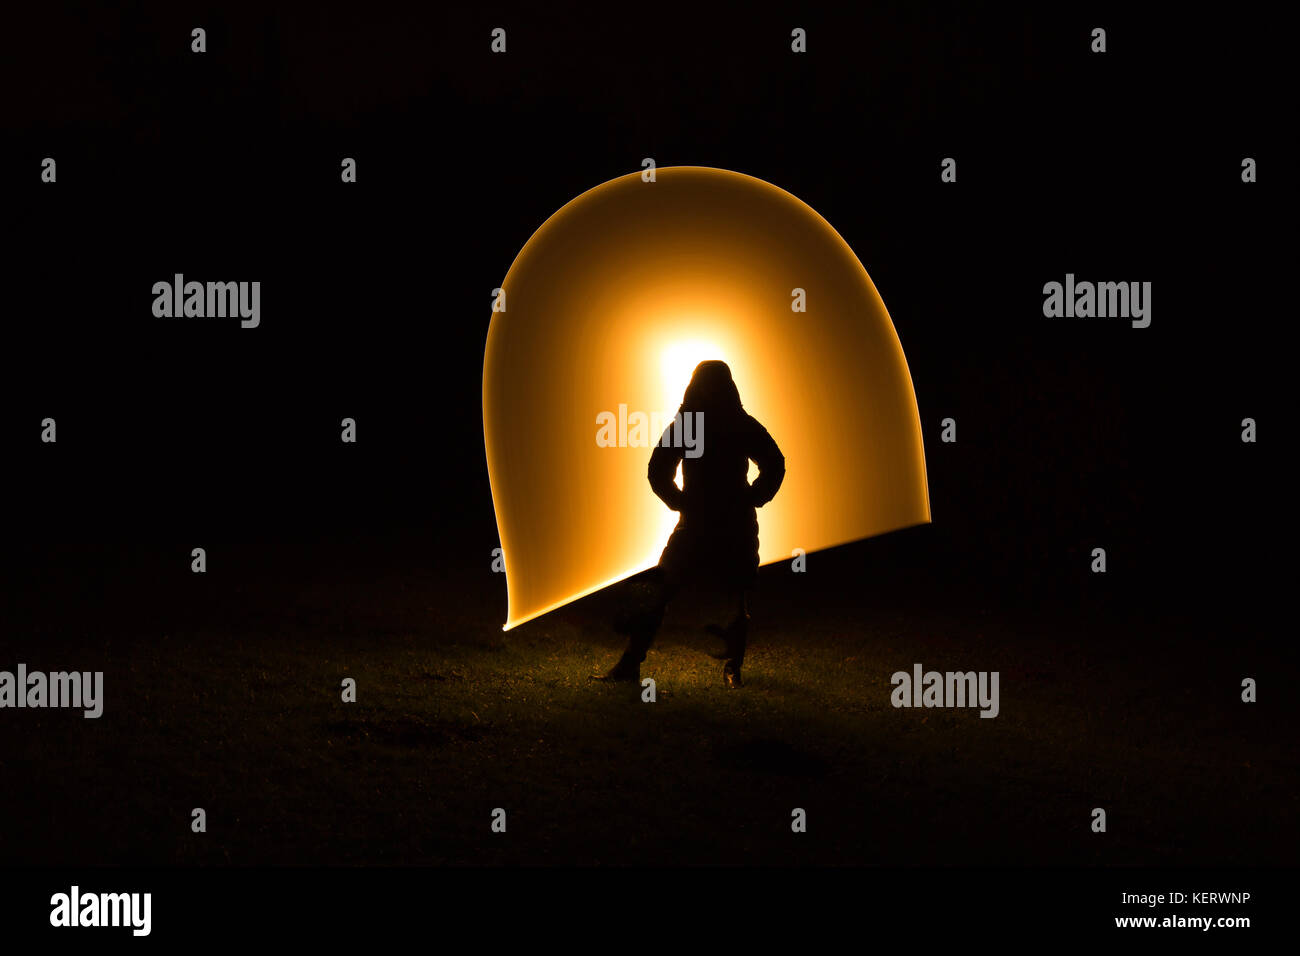 Silhouette figure of lone woman in coat standing isolated in the dark, black background with unexplained, golden light waves in arc. Light painting UK. Stock Photo